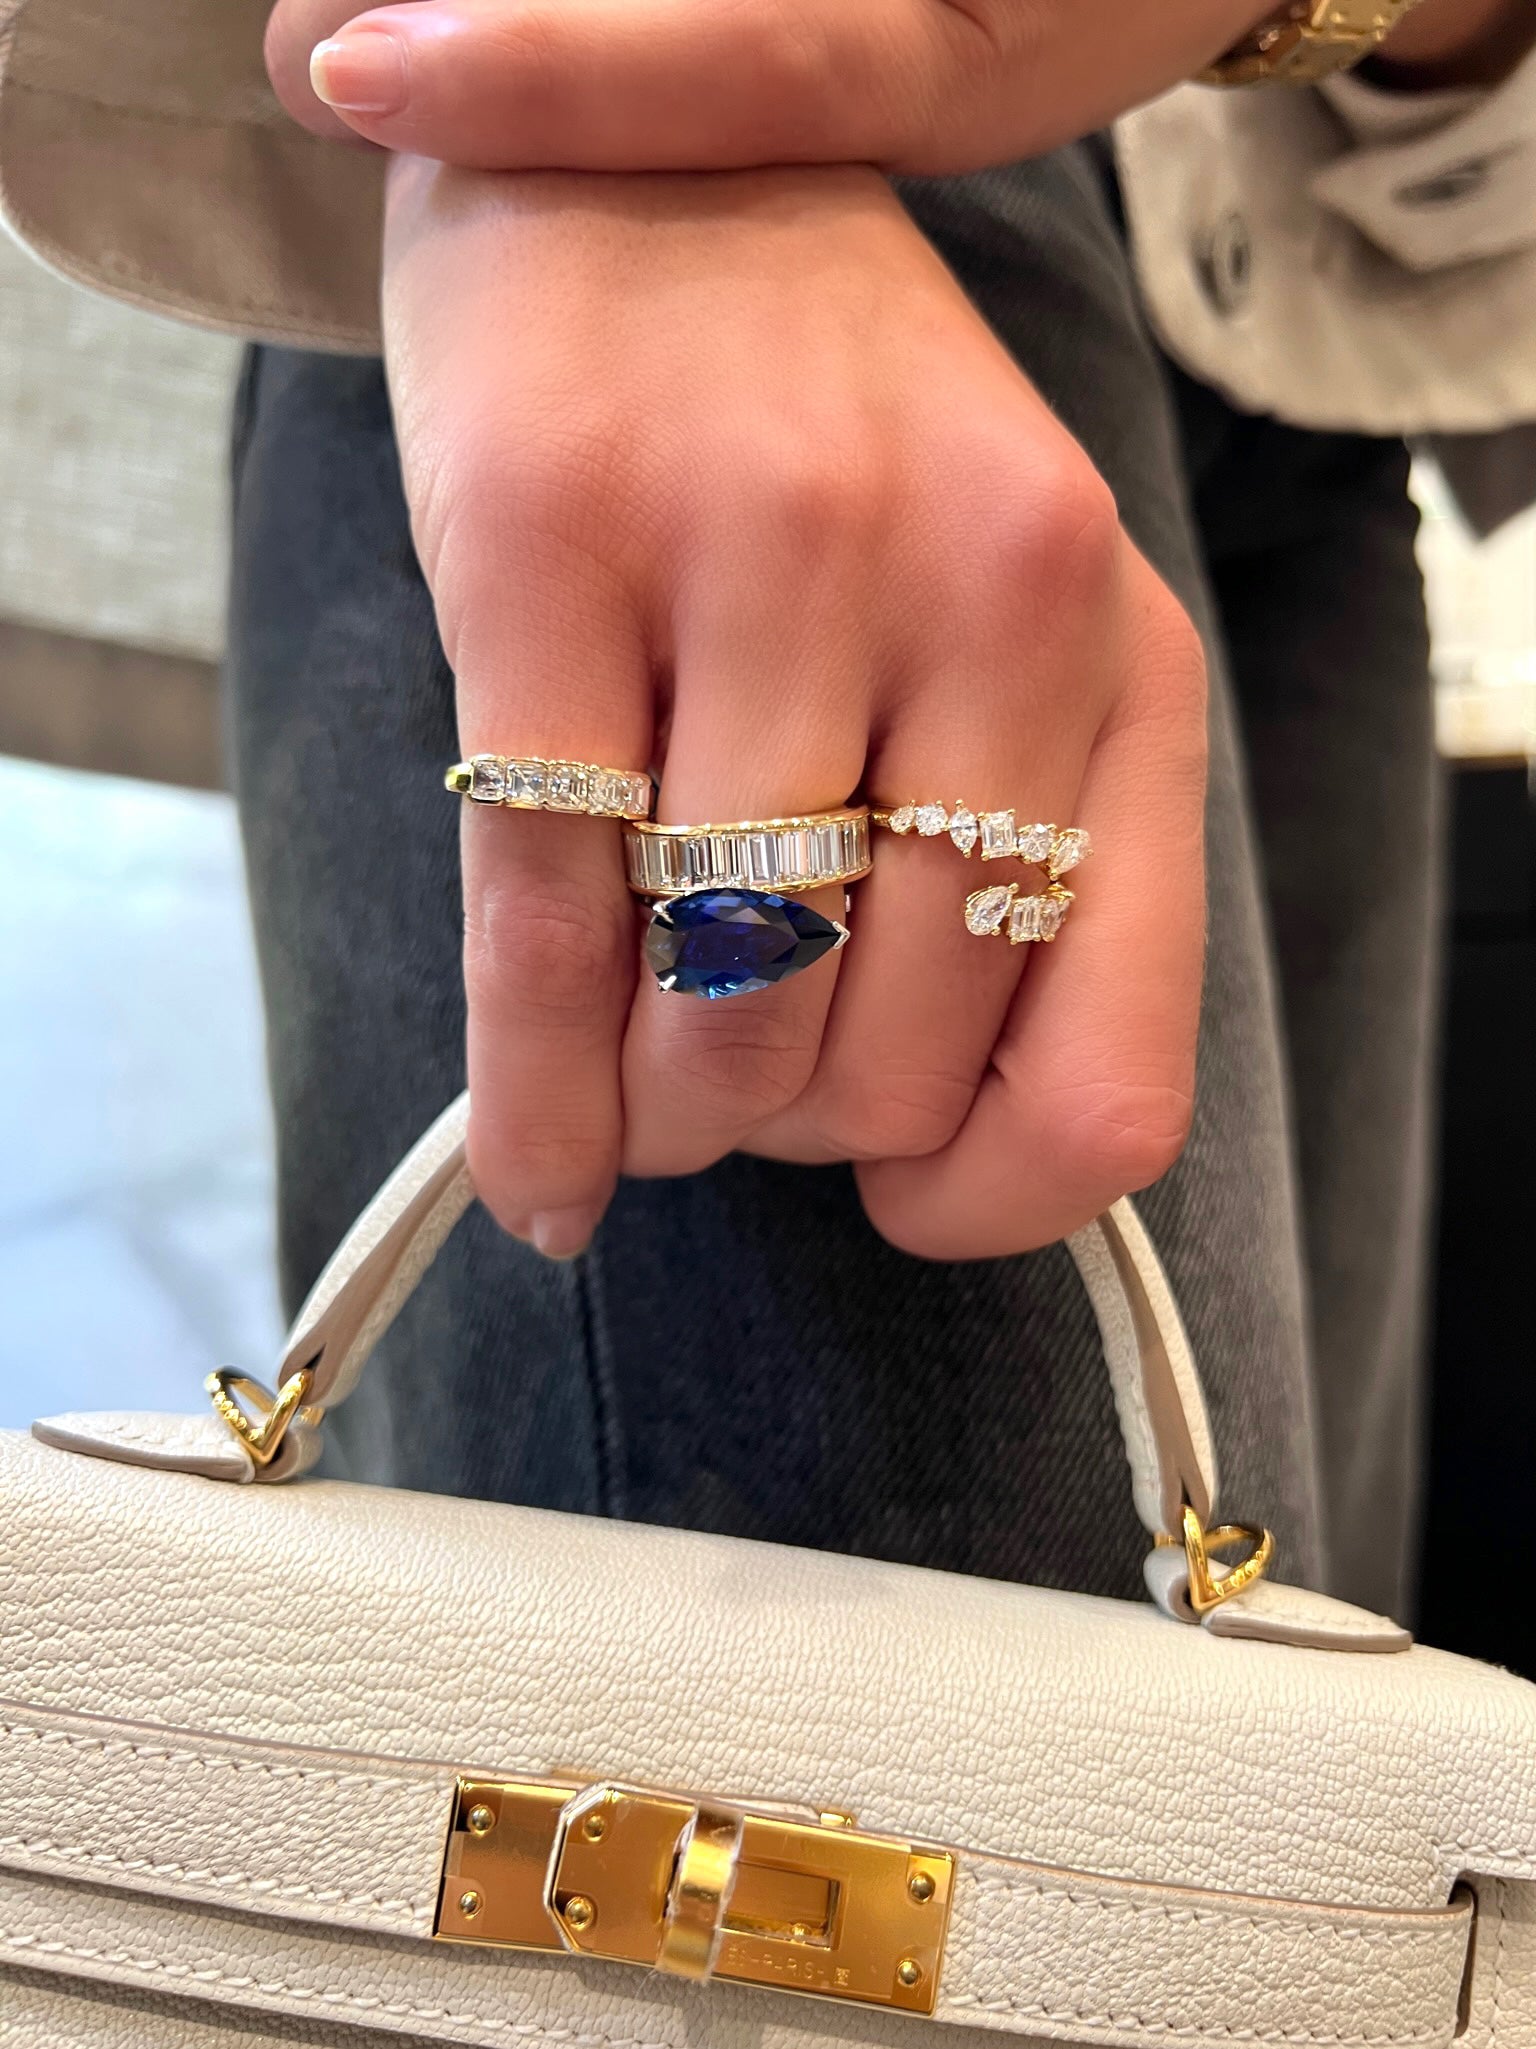 The Keira Blue Sapphire Ring